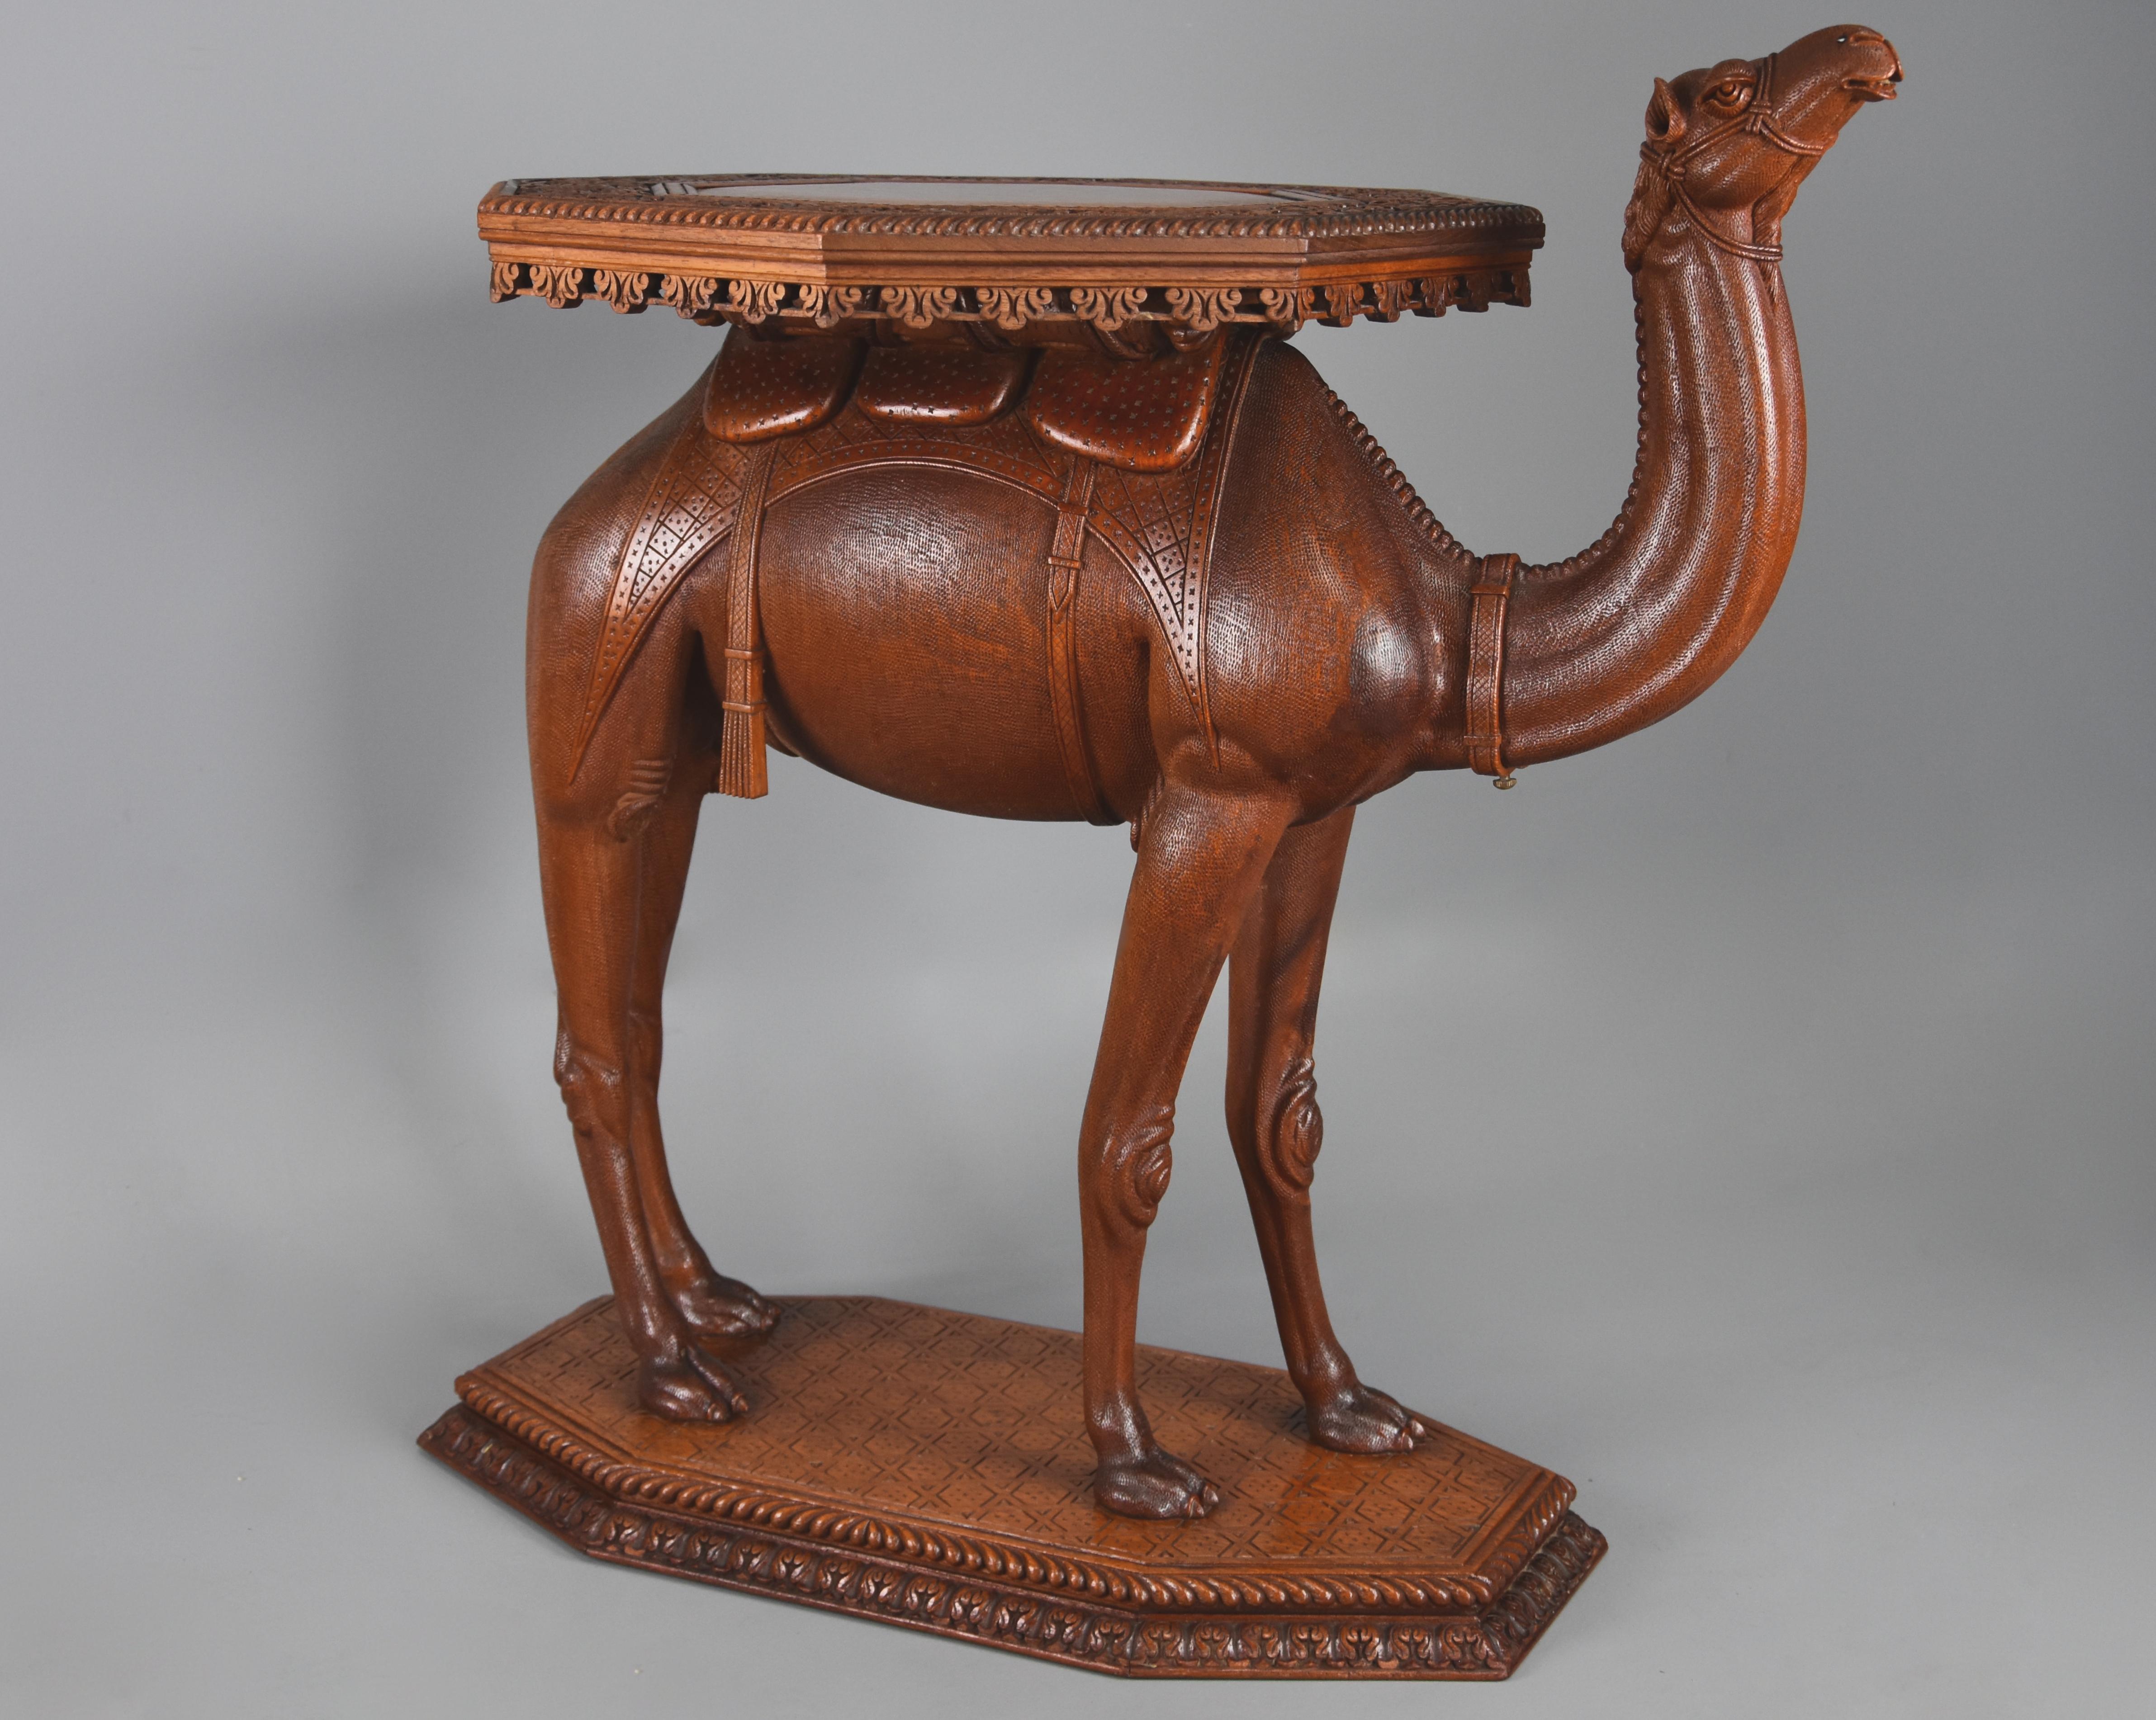 A late 19th-early 20th century Anglo Indian hardwood camel table of superb quality, possibly from the Gujarat region of India. 

The table consists of an octagonal top with plain central section surrounding by a profusely carved floral and foliate